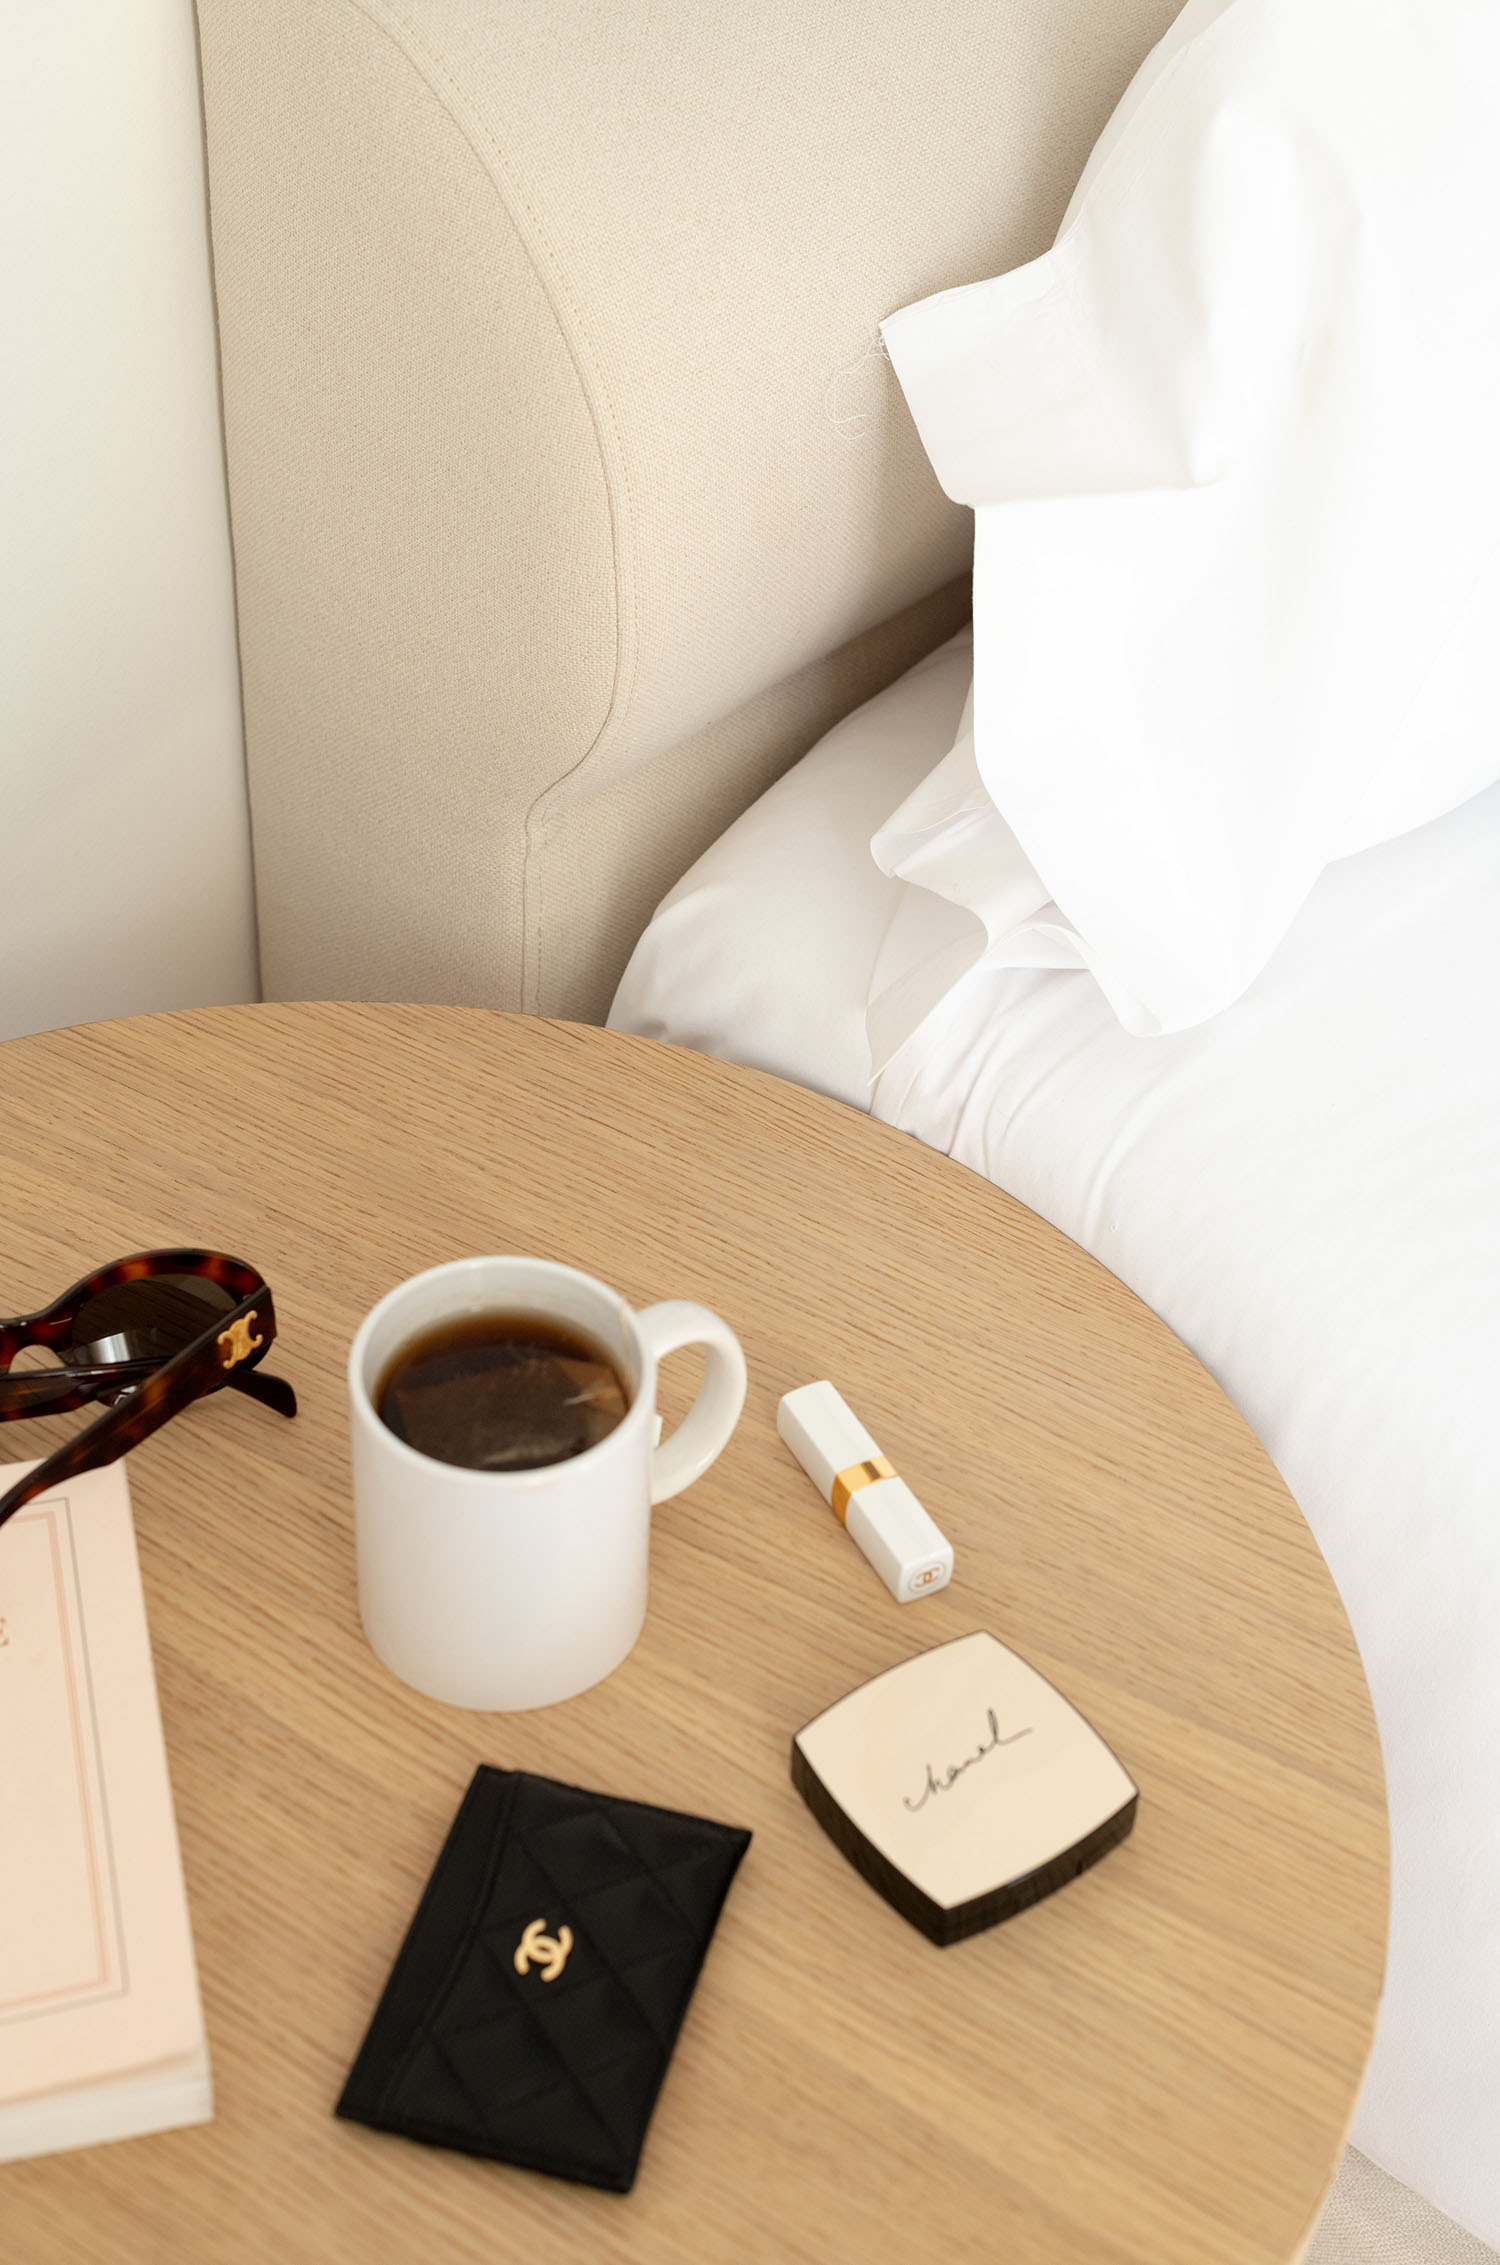 Coco & Voltaire - Celine Triomphe sunglasses, Chanel card holder and teacup on bedside table